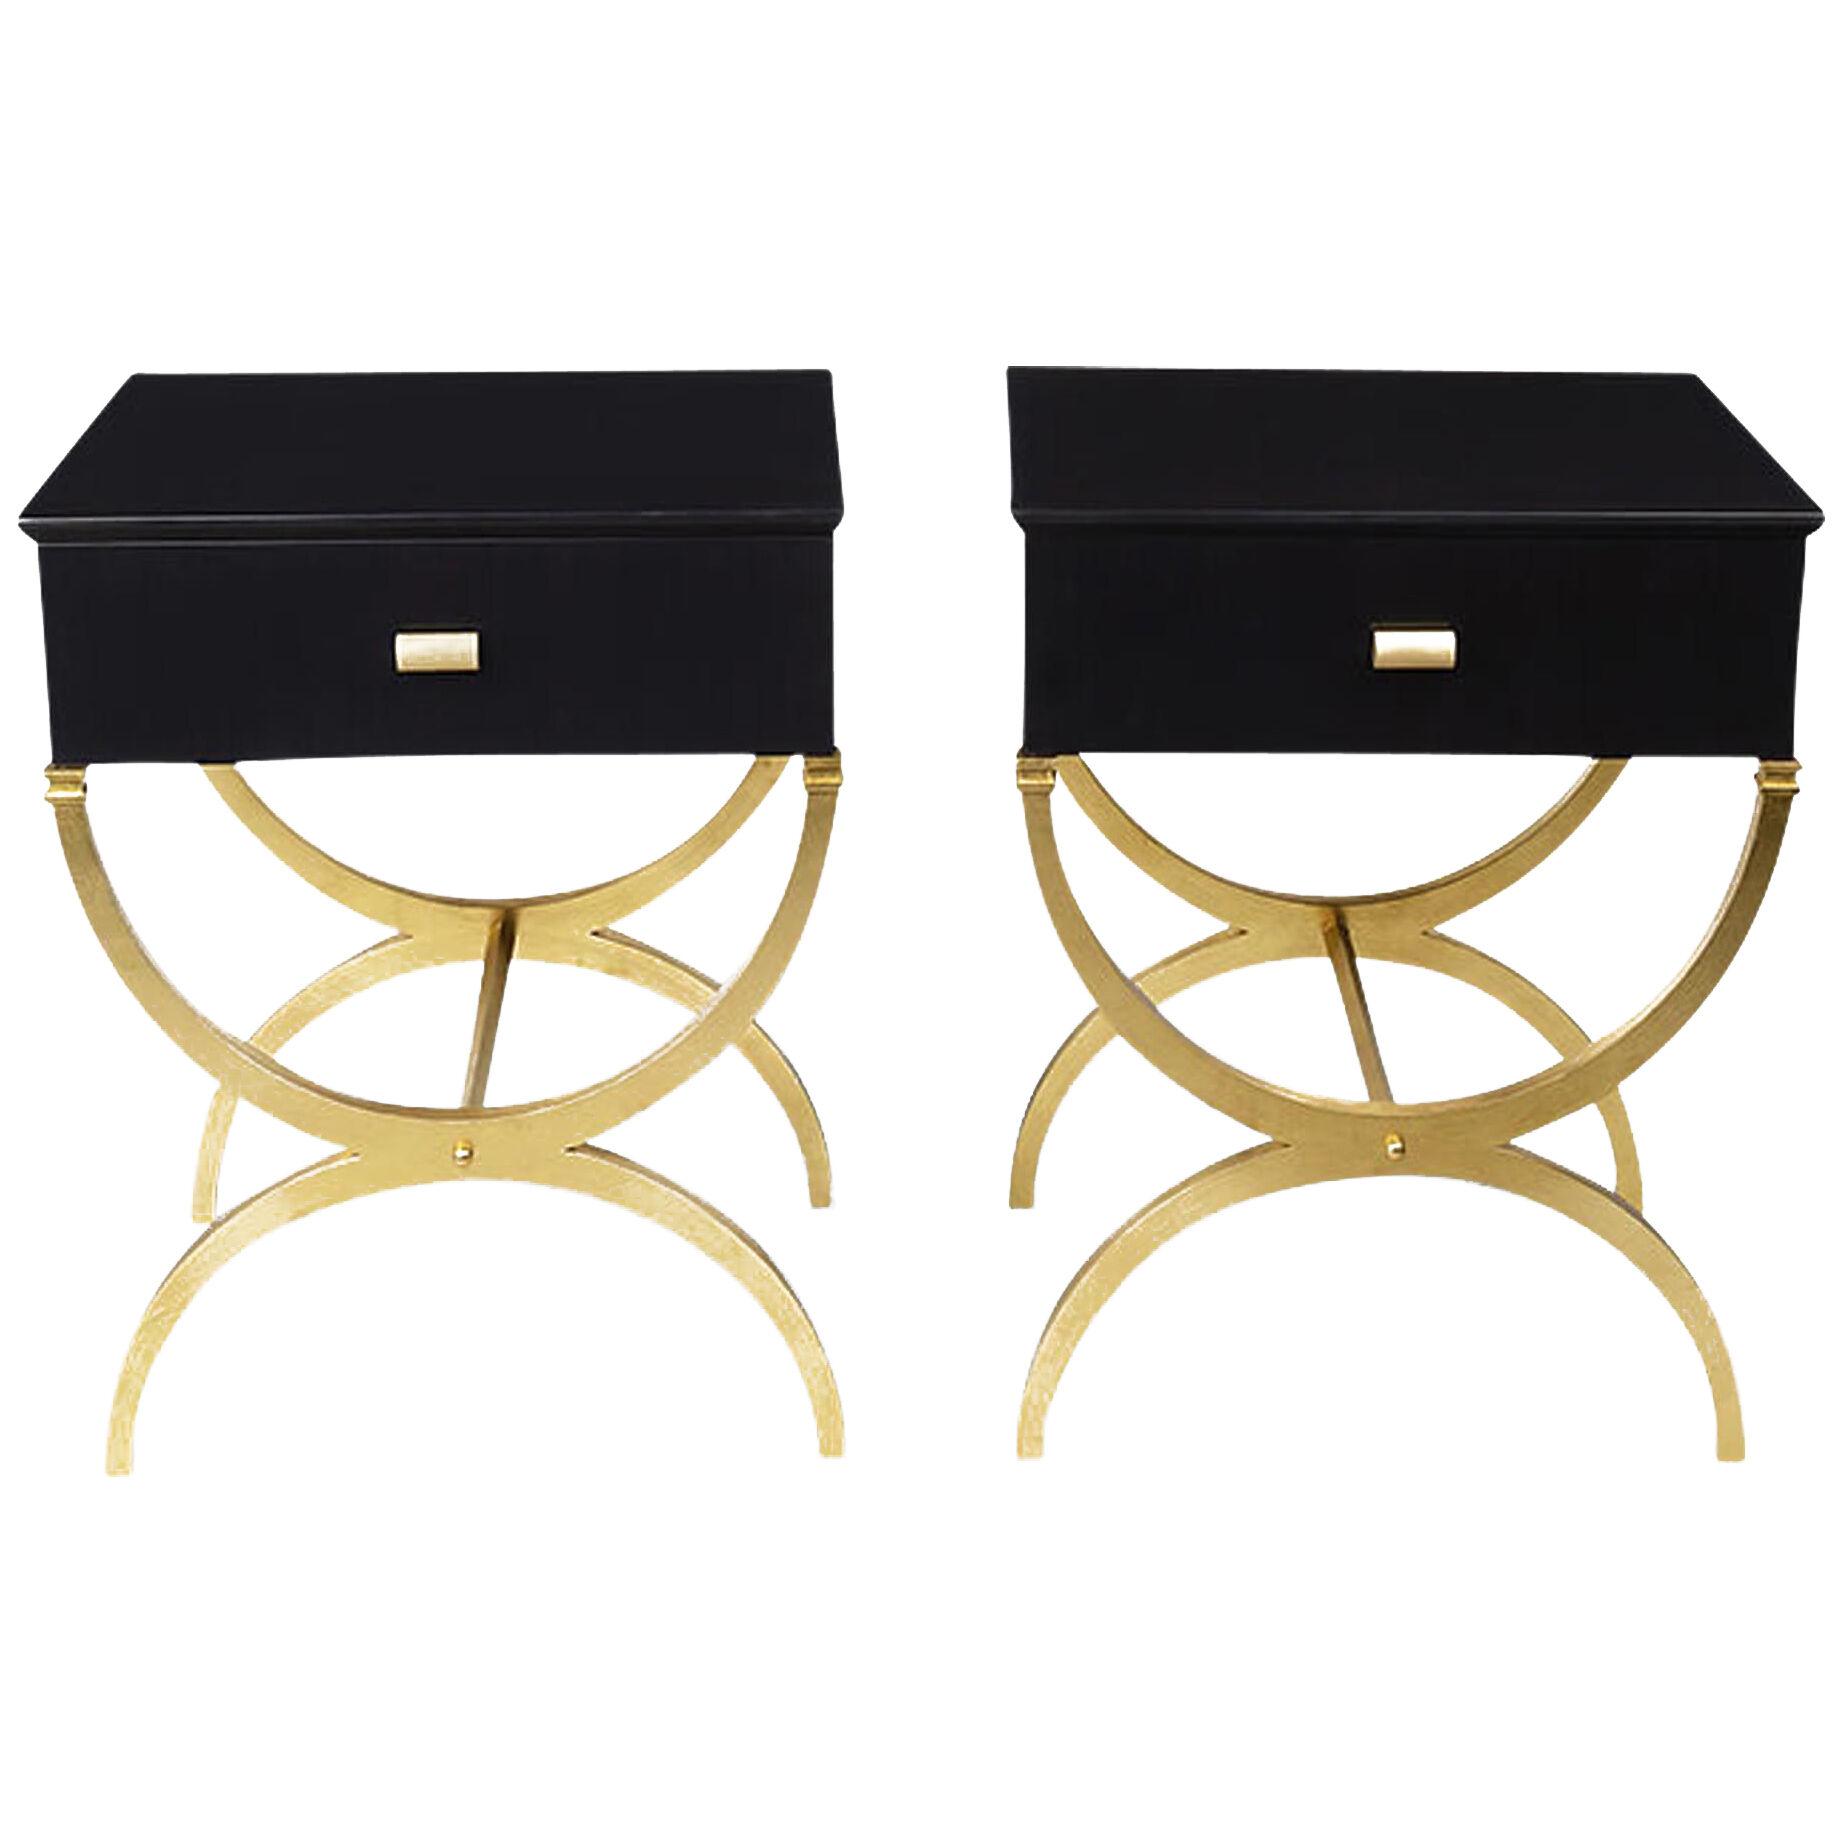 Pair of Mid-century style End Tables